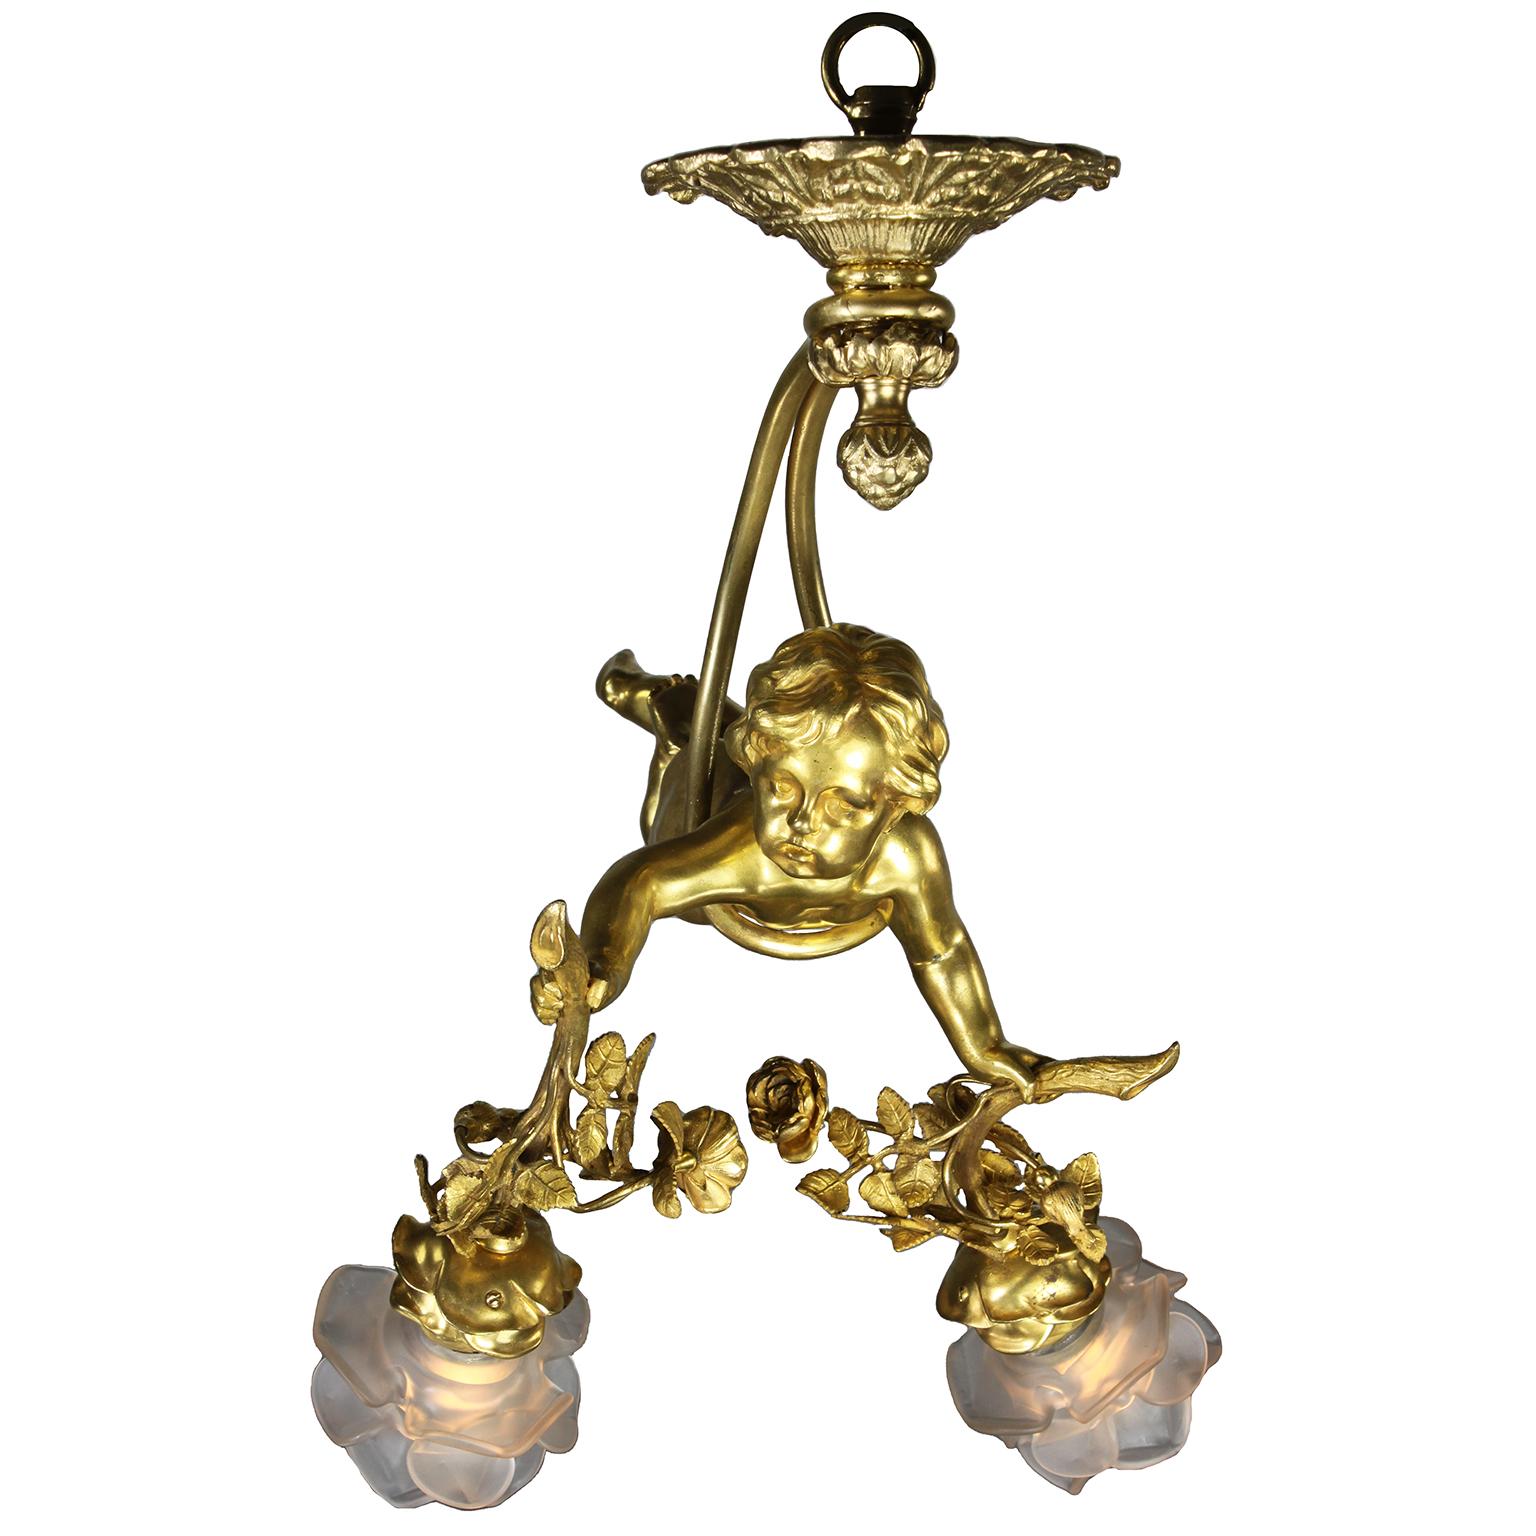 A charming whimsical French 19th/20th century Belle Époque two-light gilt bronze figural chandelier pendant. The charming gilt bronze figure of a naked hovering Putto (Child), suspended from a ribbon-tied tassel wrapped around his body, holding a